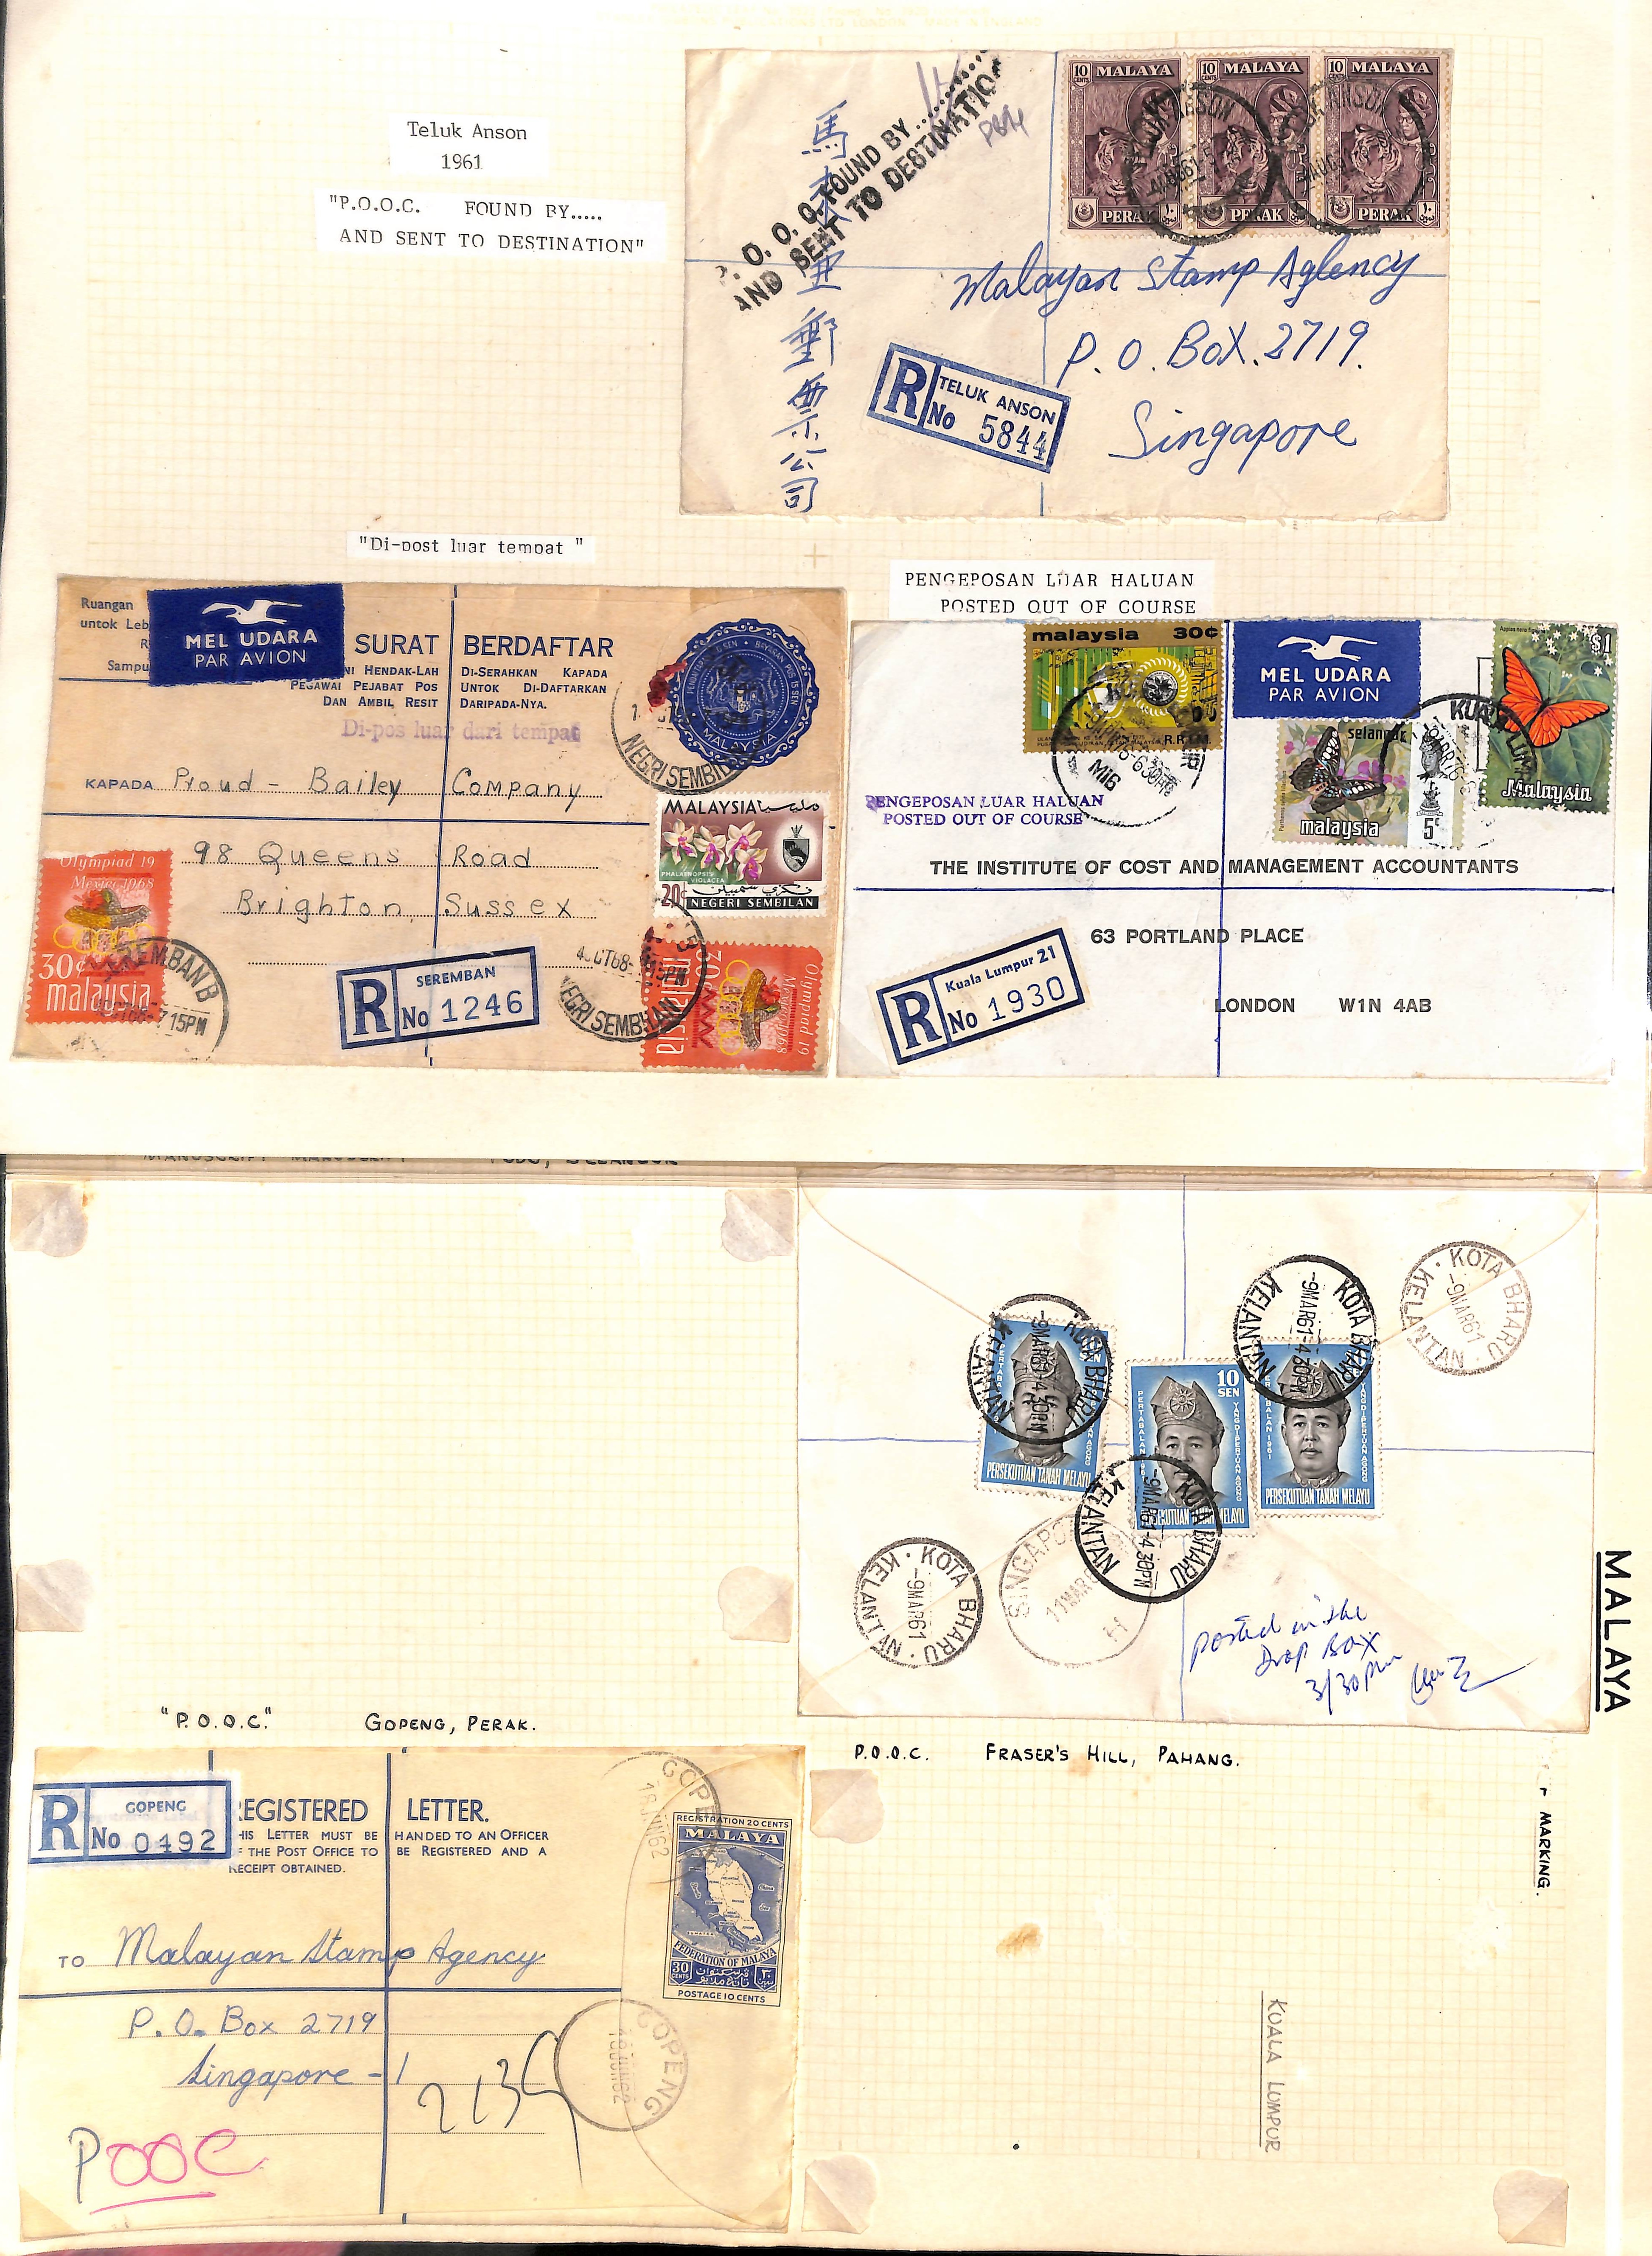 1947-90 Registered covers sent from or within Malaysia, all Posted Out of Course, various cachets, a - Image 6 of 6